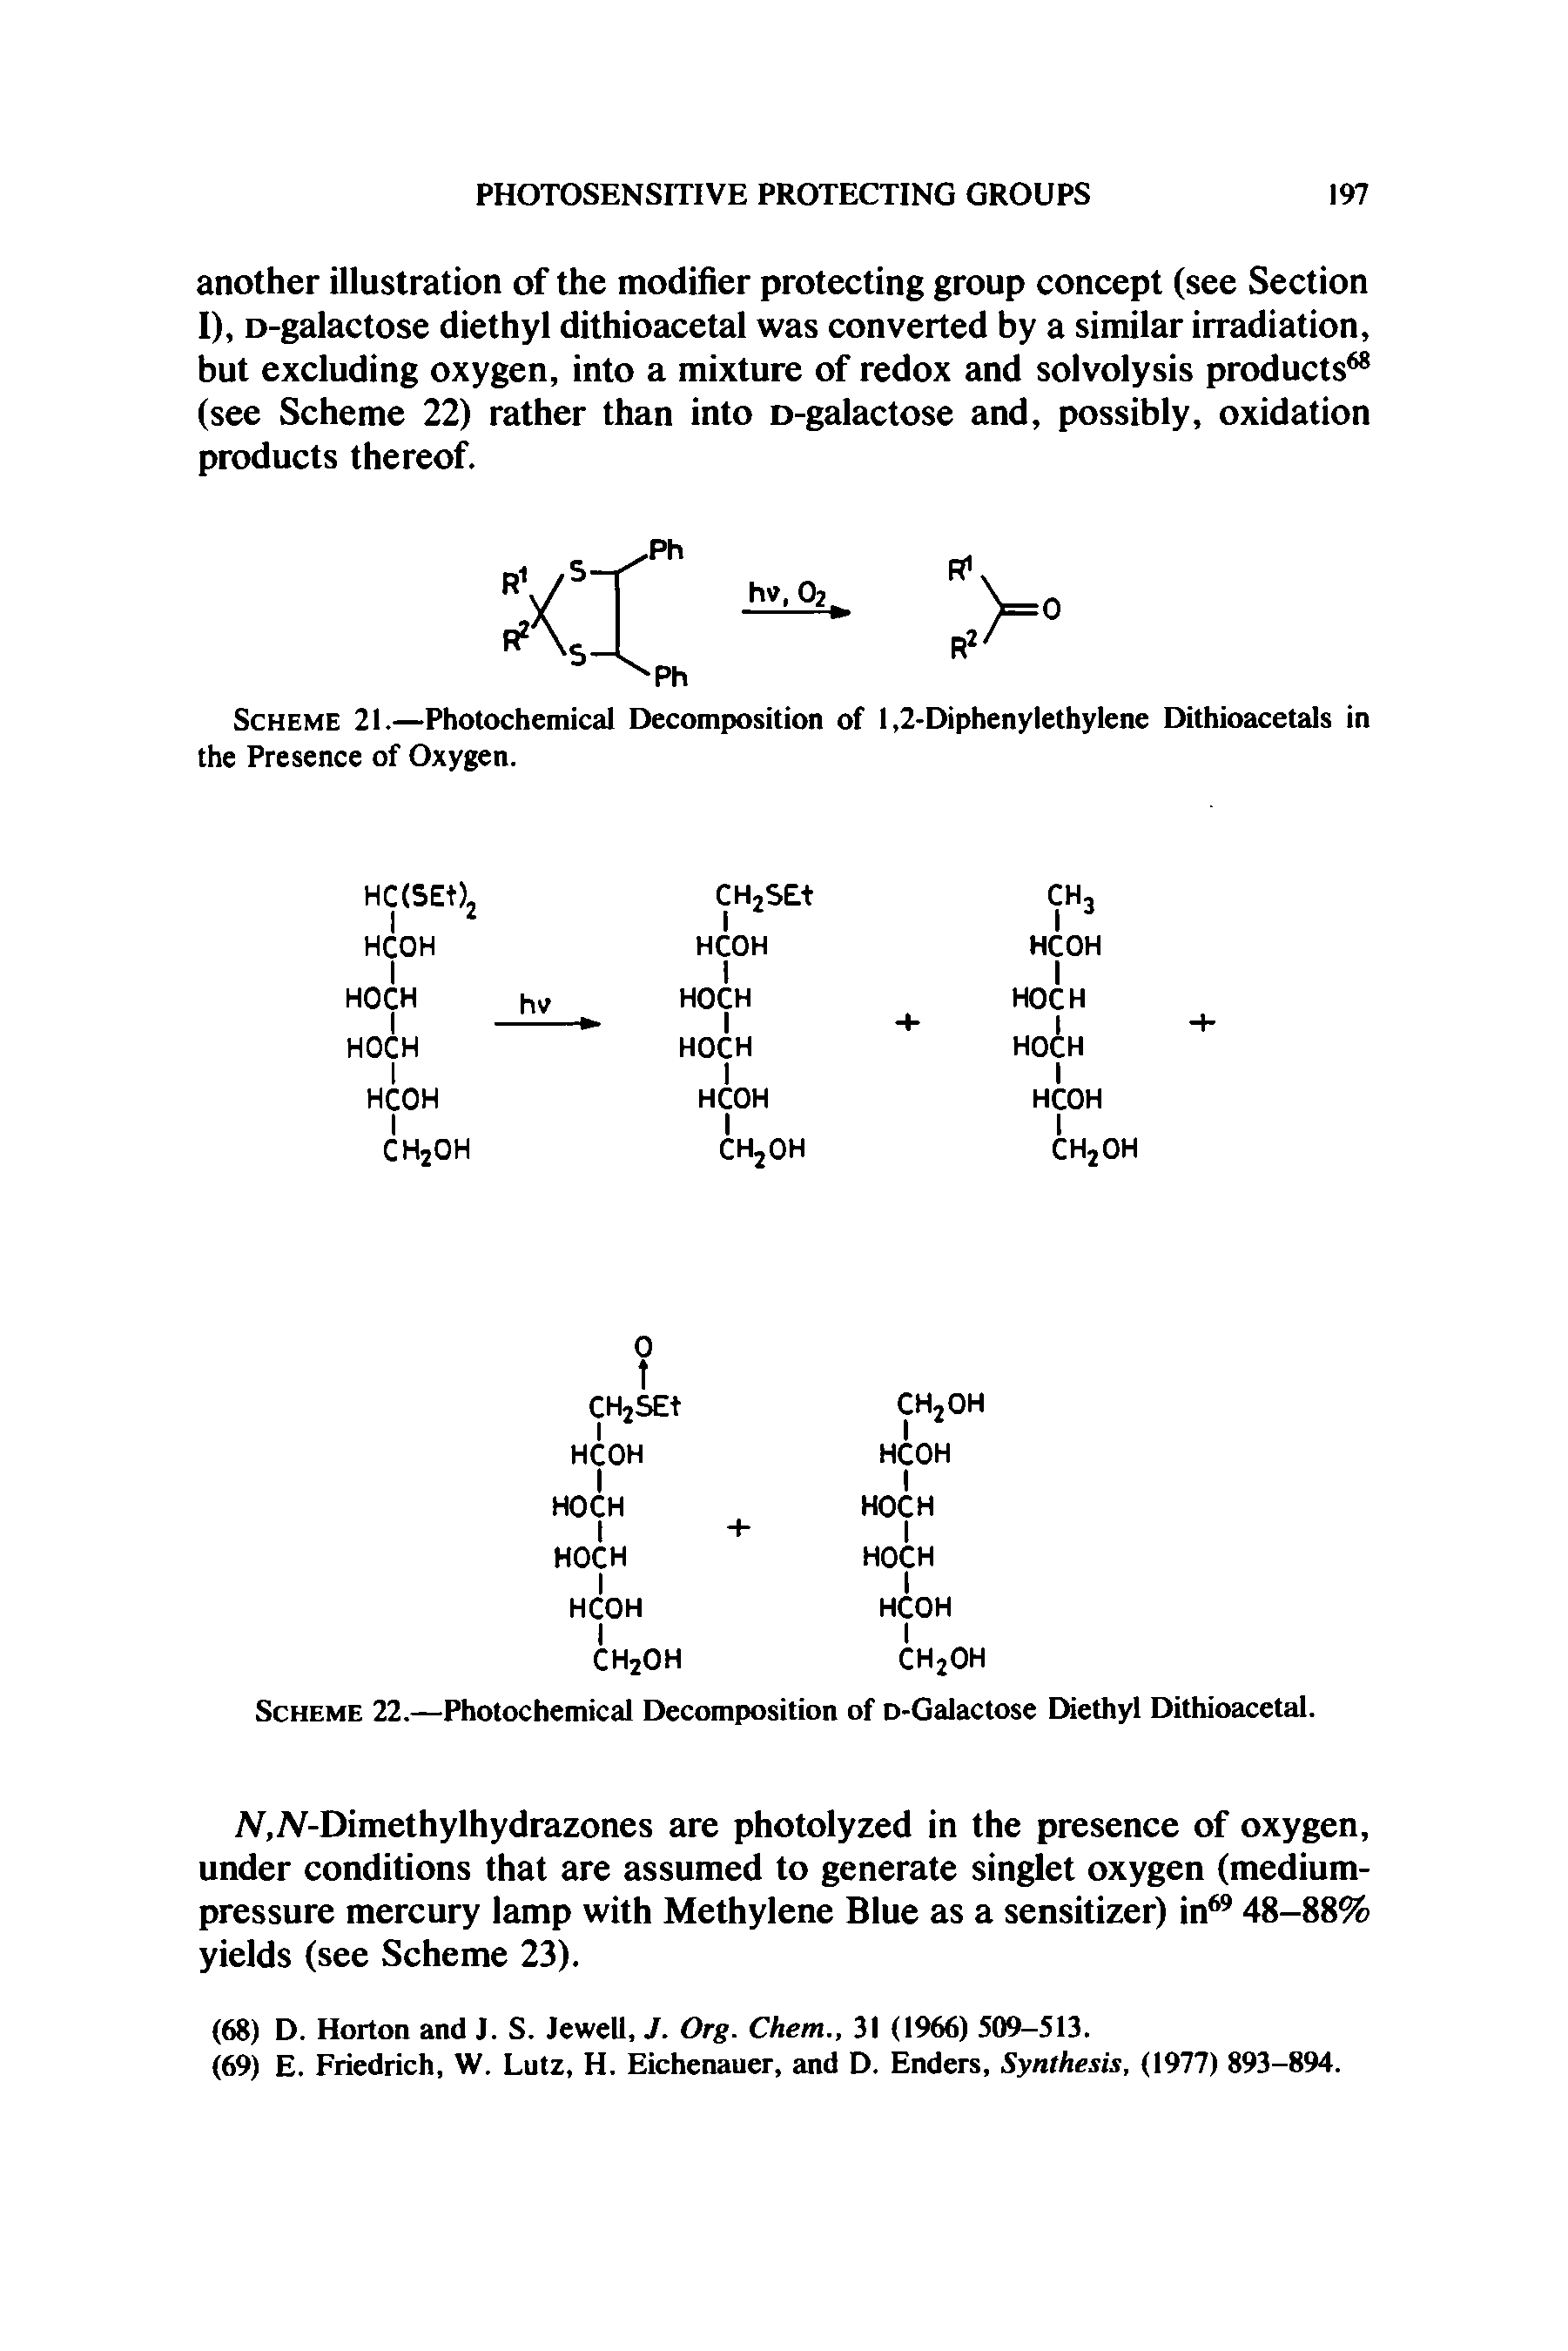 Scheme 22.—Photochemical Decomposition of o-Galactose Diethyl Dithioacetal.